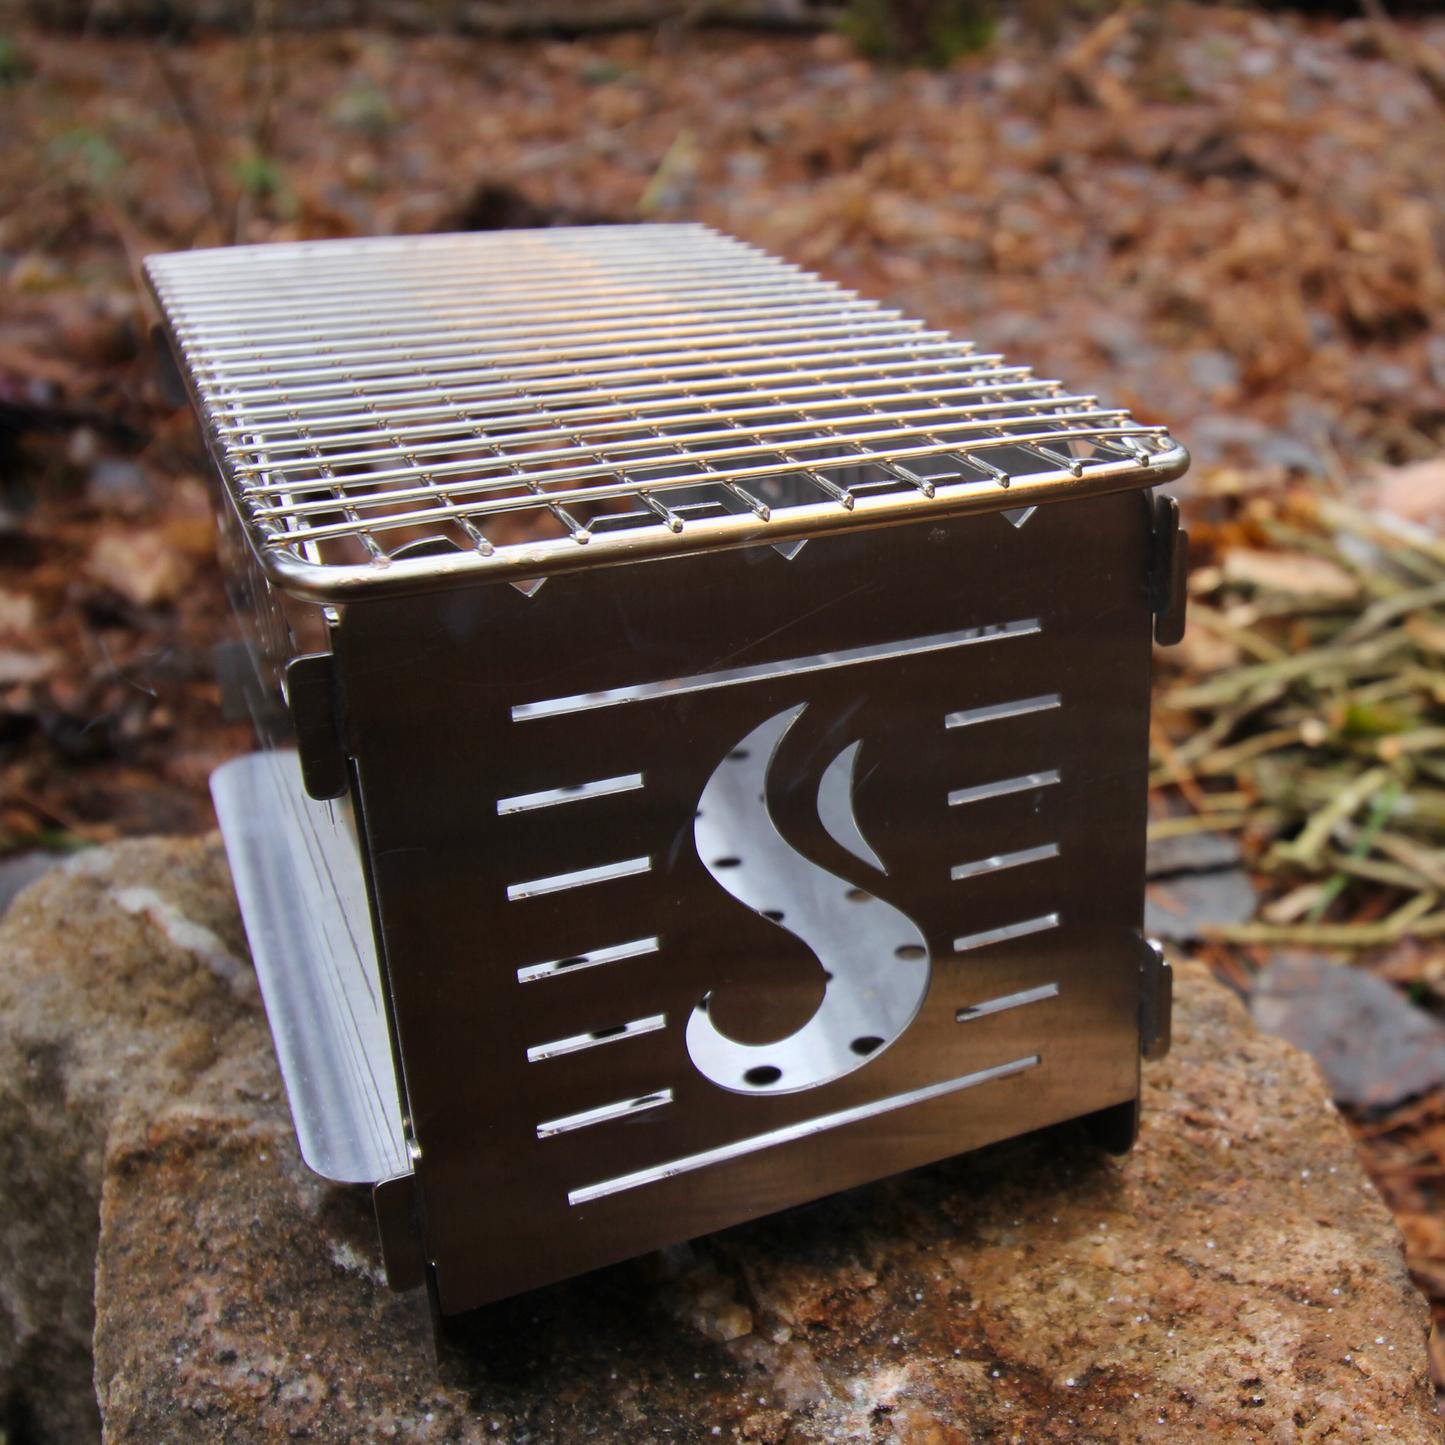 CAMPKITCHEN Twig Stove. Stove is on an angle showcasing the back end complete with the CAMPKITCHEN flame.